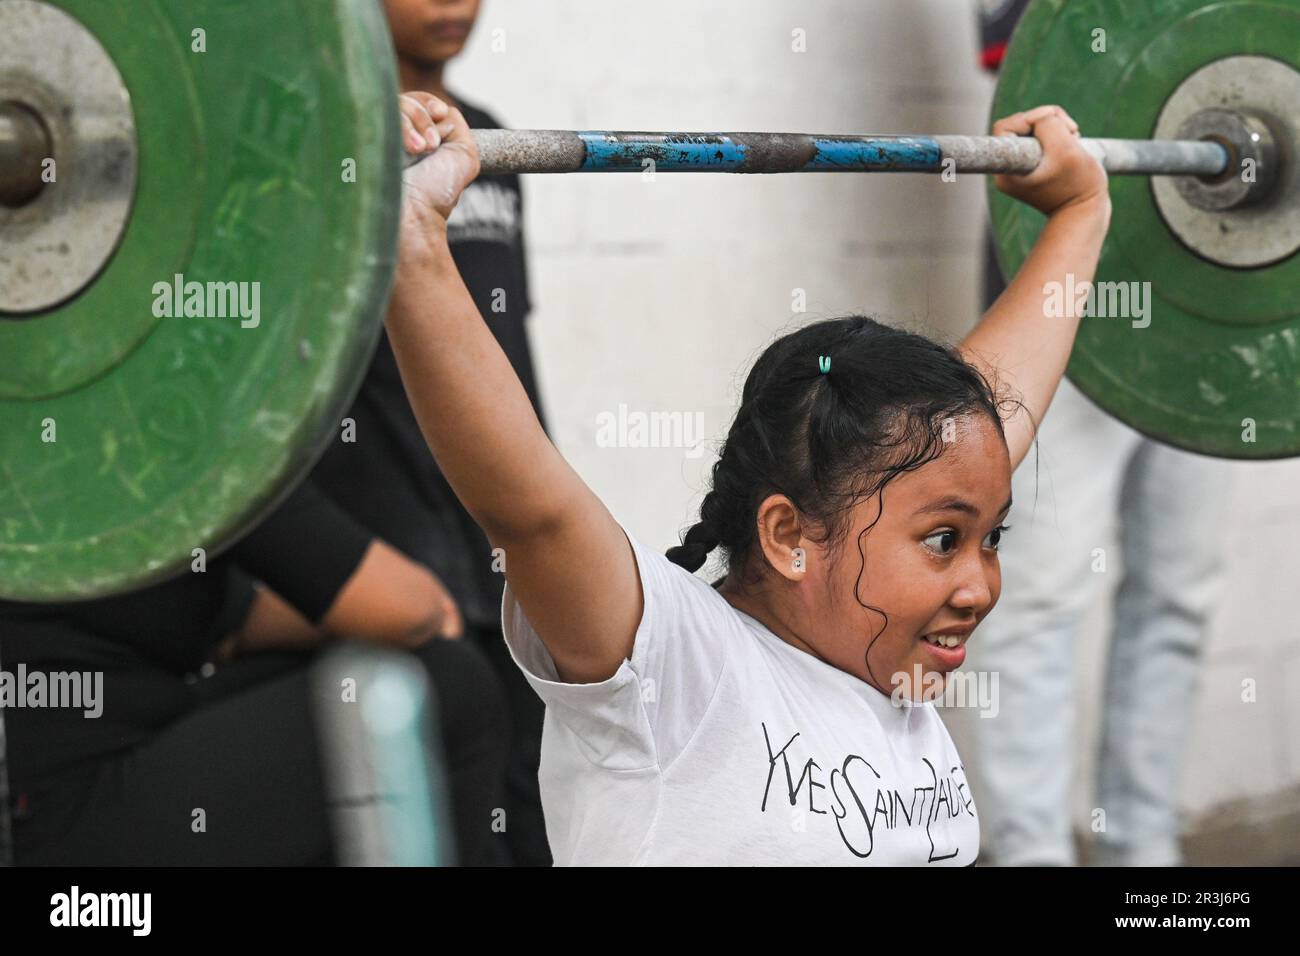 Bogor, Indonesia. 23rd May, 2023. A girl practices weightlifting at Batavia Bersatu Maju (BBM) gym in Parung Panjang district in Bogor, West Java, Indonesia, on May 23, 2023. BBM gym is established in 2021 by Deni, a former Indonesian weightlifter who was placed the first position in Southeast Asian Games 2019. Children from 9 to 17 years old participate in daily weightlifting training here for free. Credit: Agung Kuncahya B./Xinhua/Alamy Live News Stock Photo